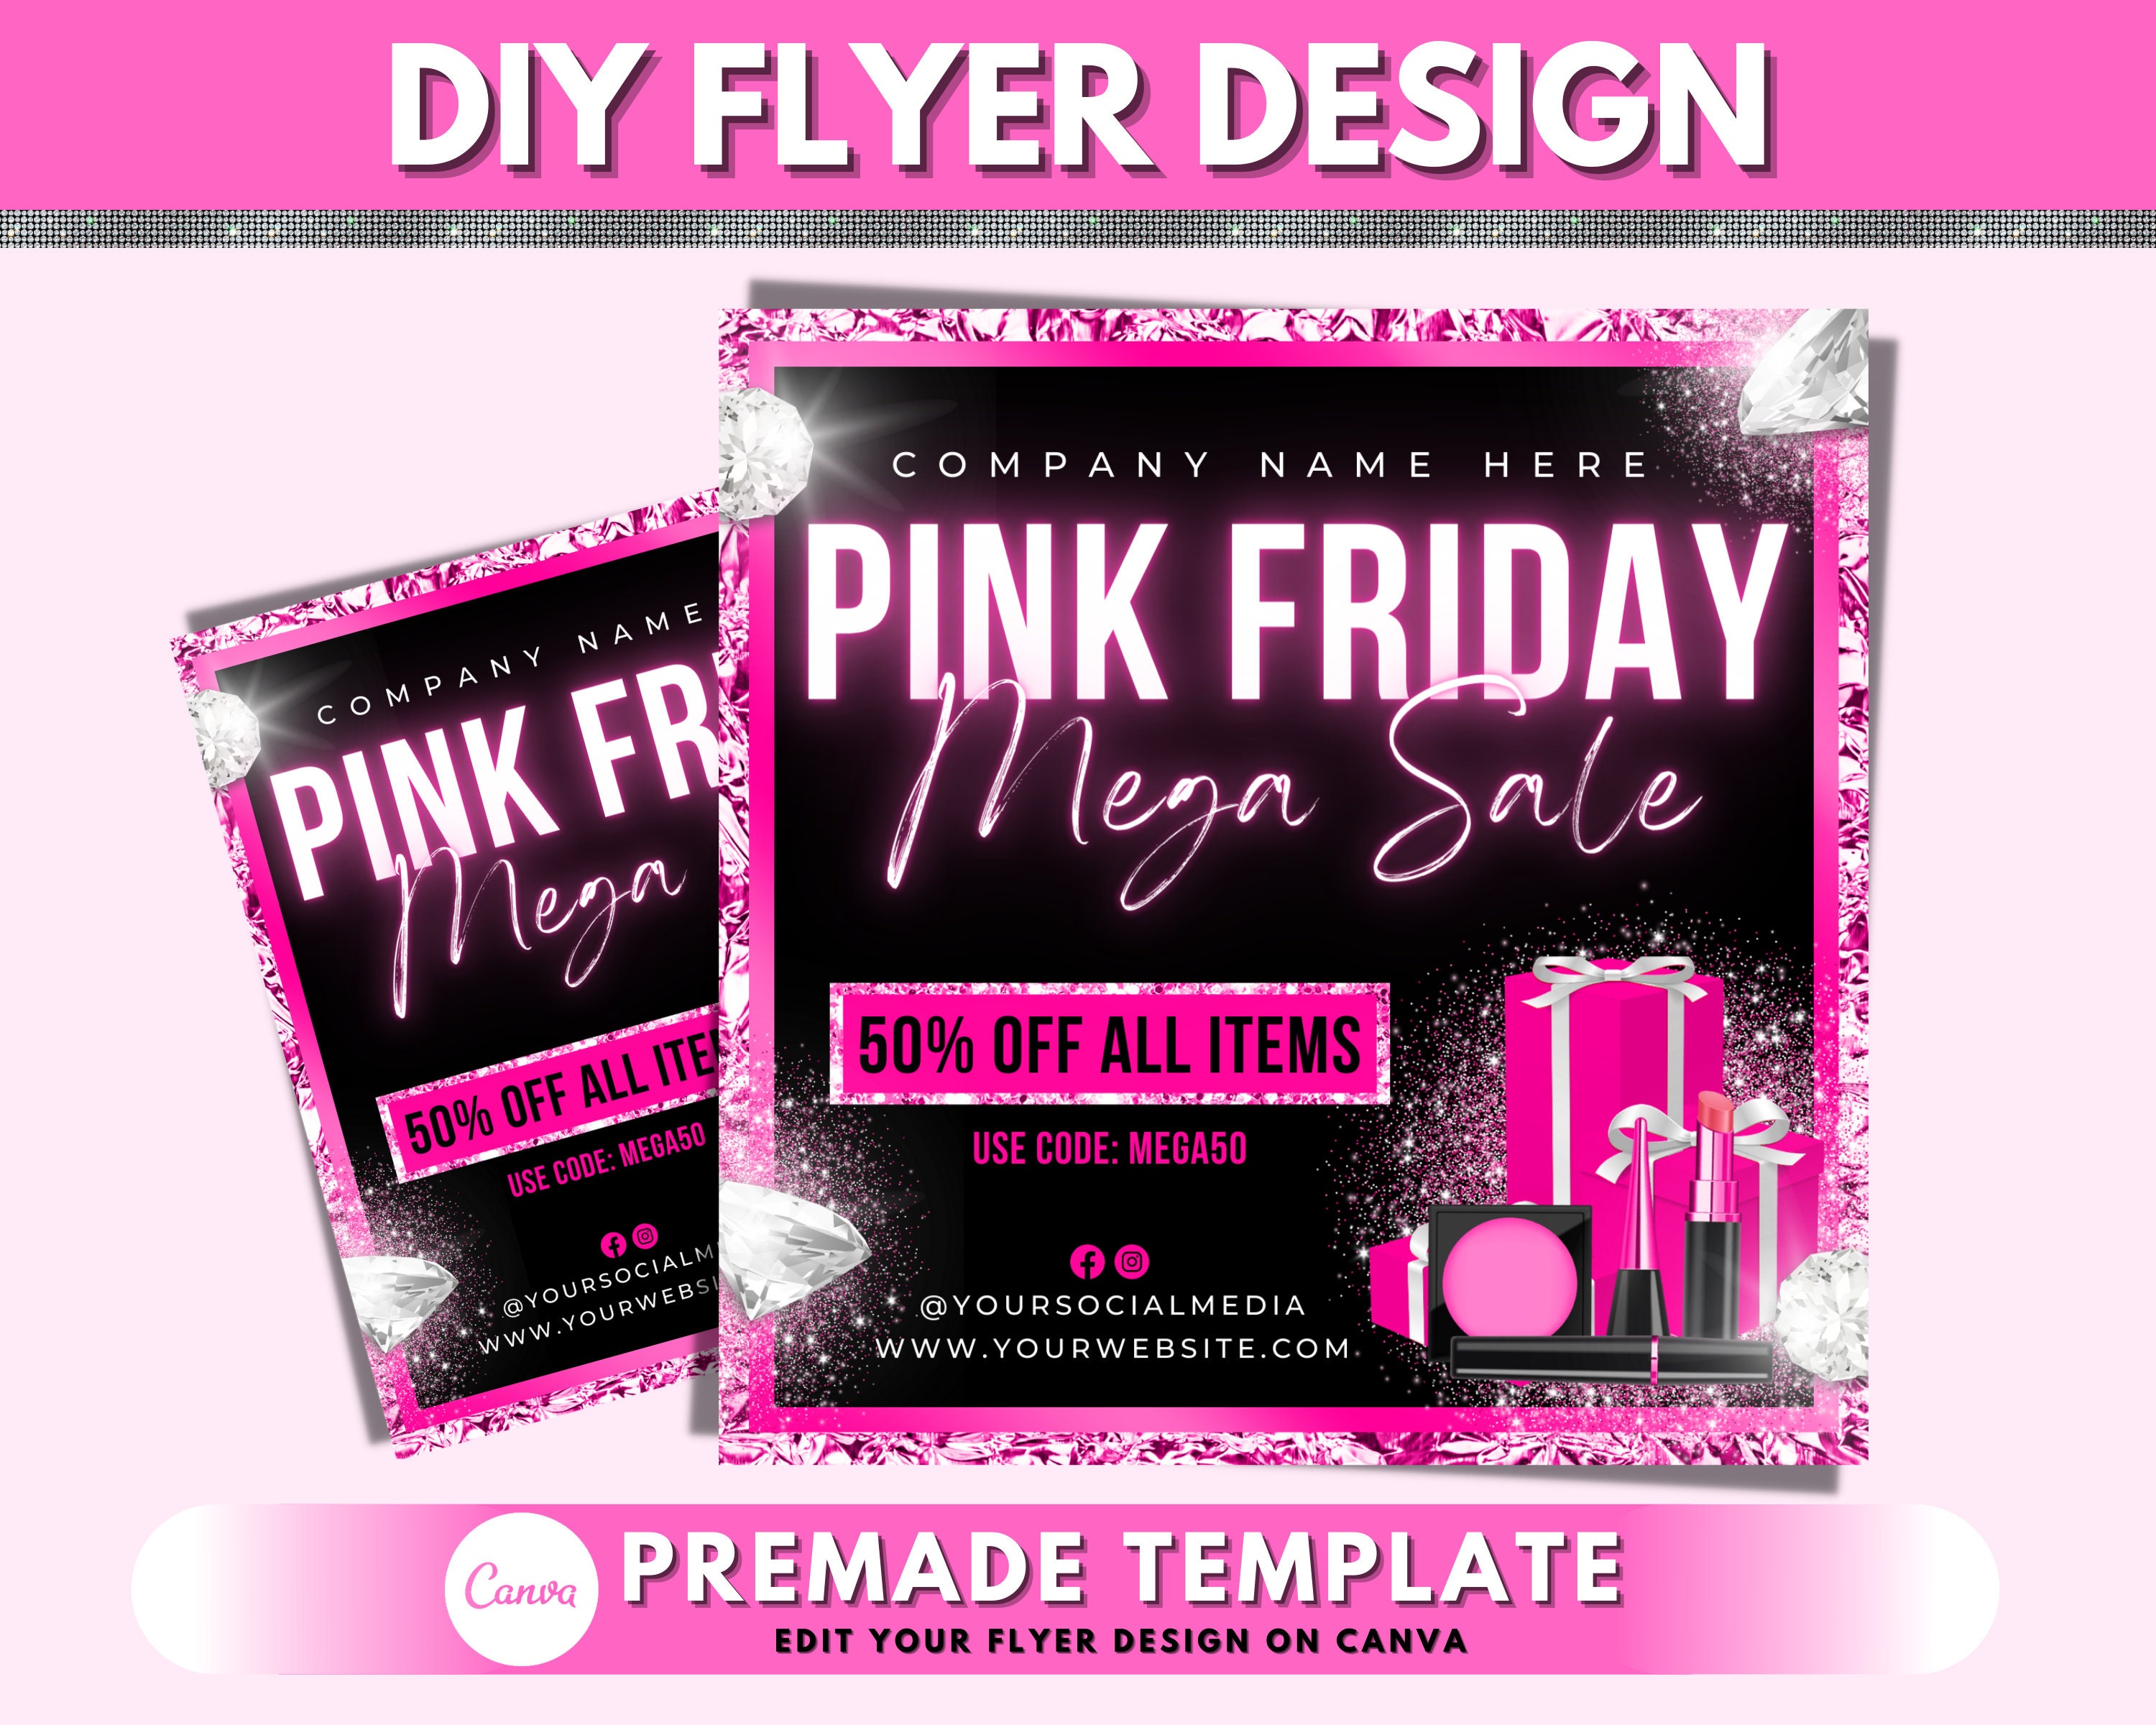 Great Black Friday flyer template